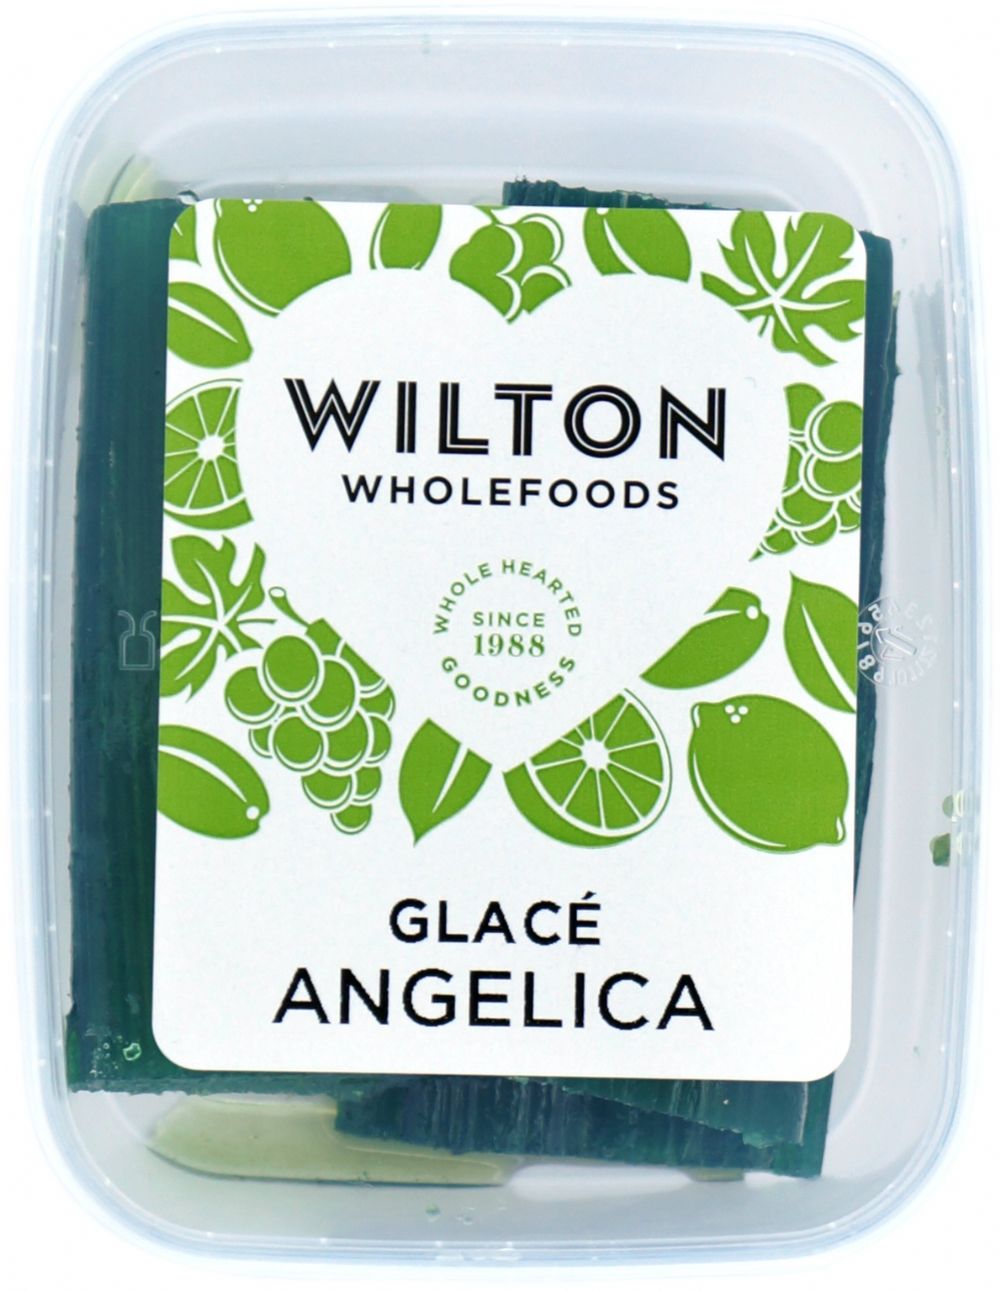 Wilton Glace Angelica